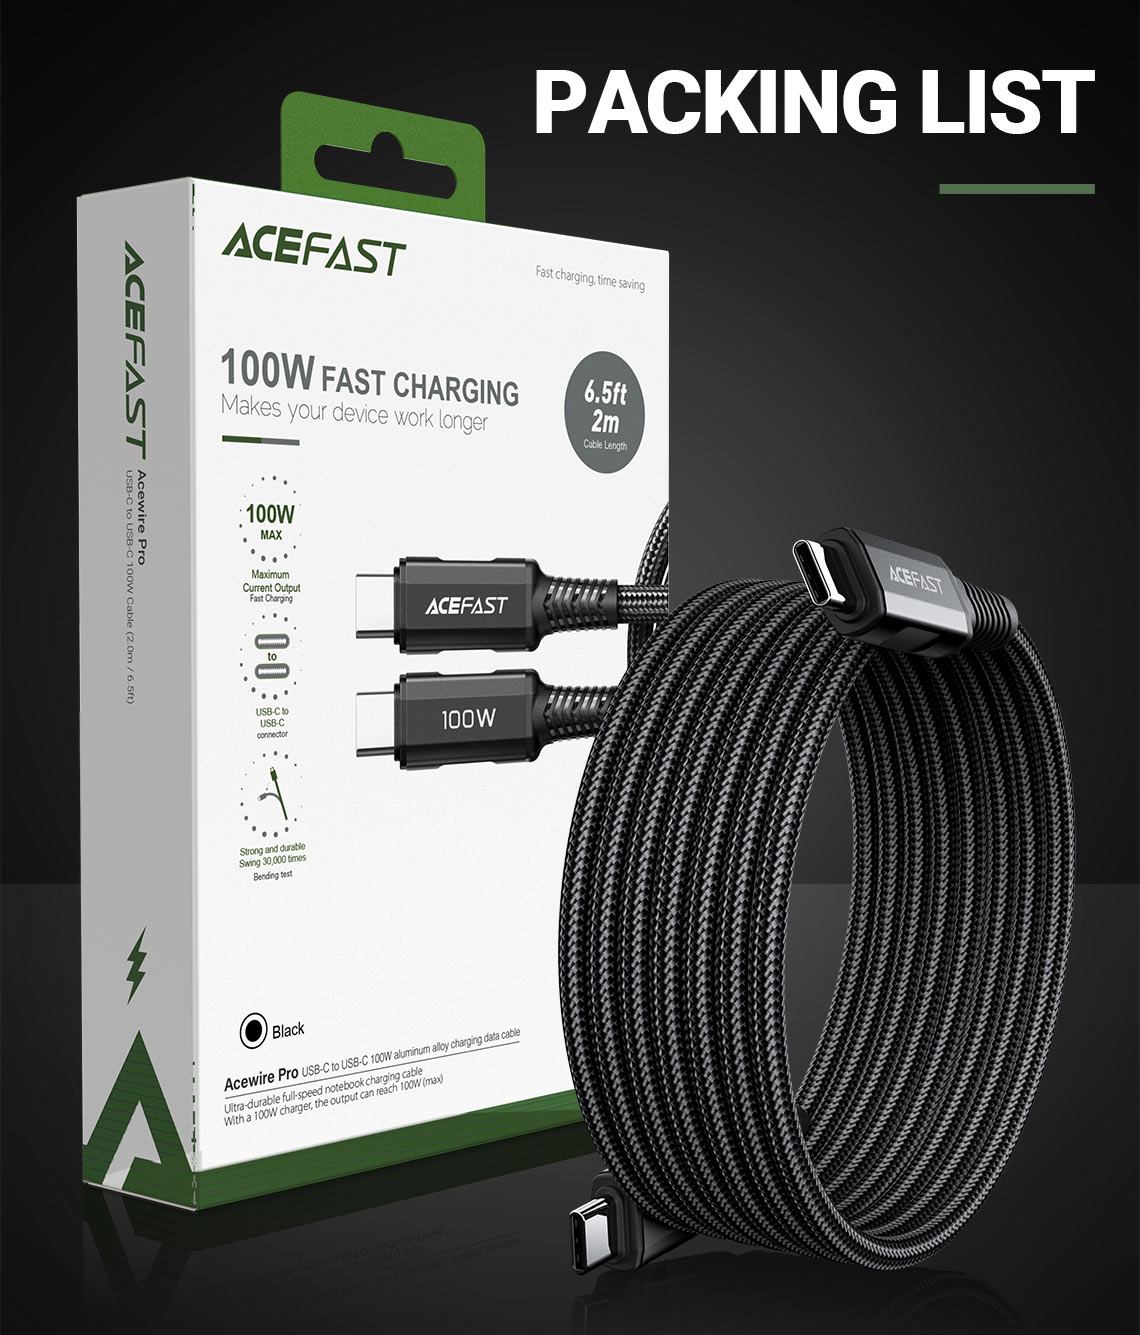 acefast-c4-03-usbc-to-usbc-100w-charging-data-cable-packing-list